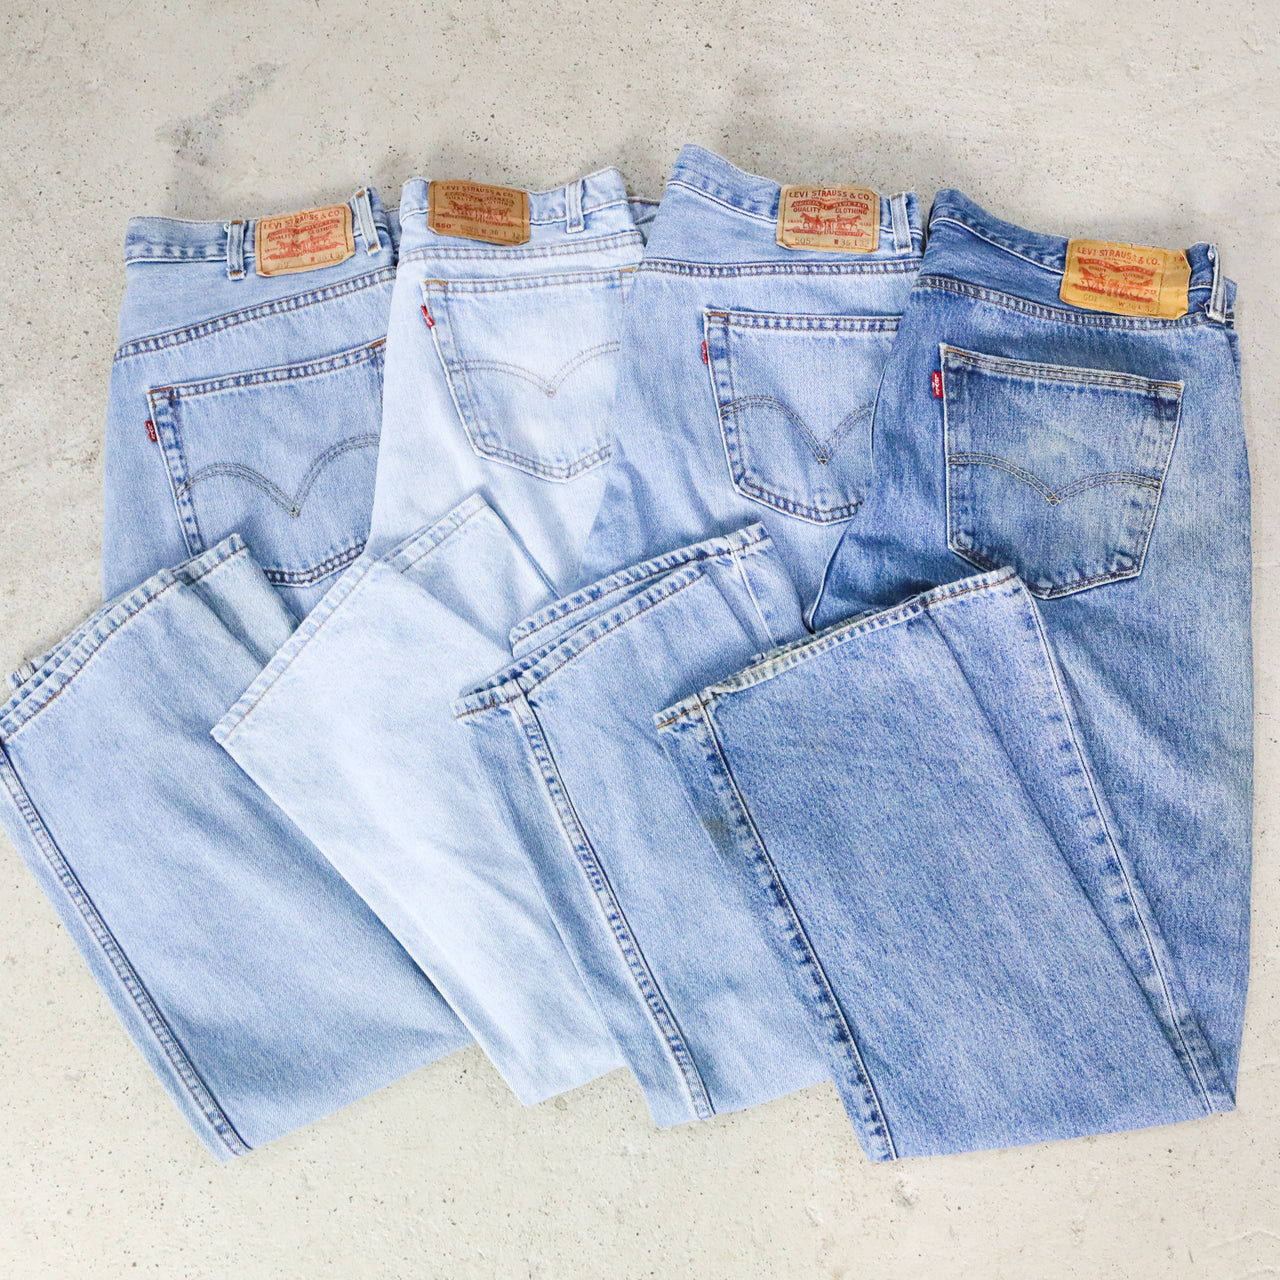 Levi Jeans 25-34 inches